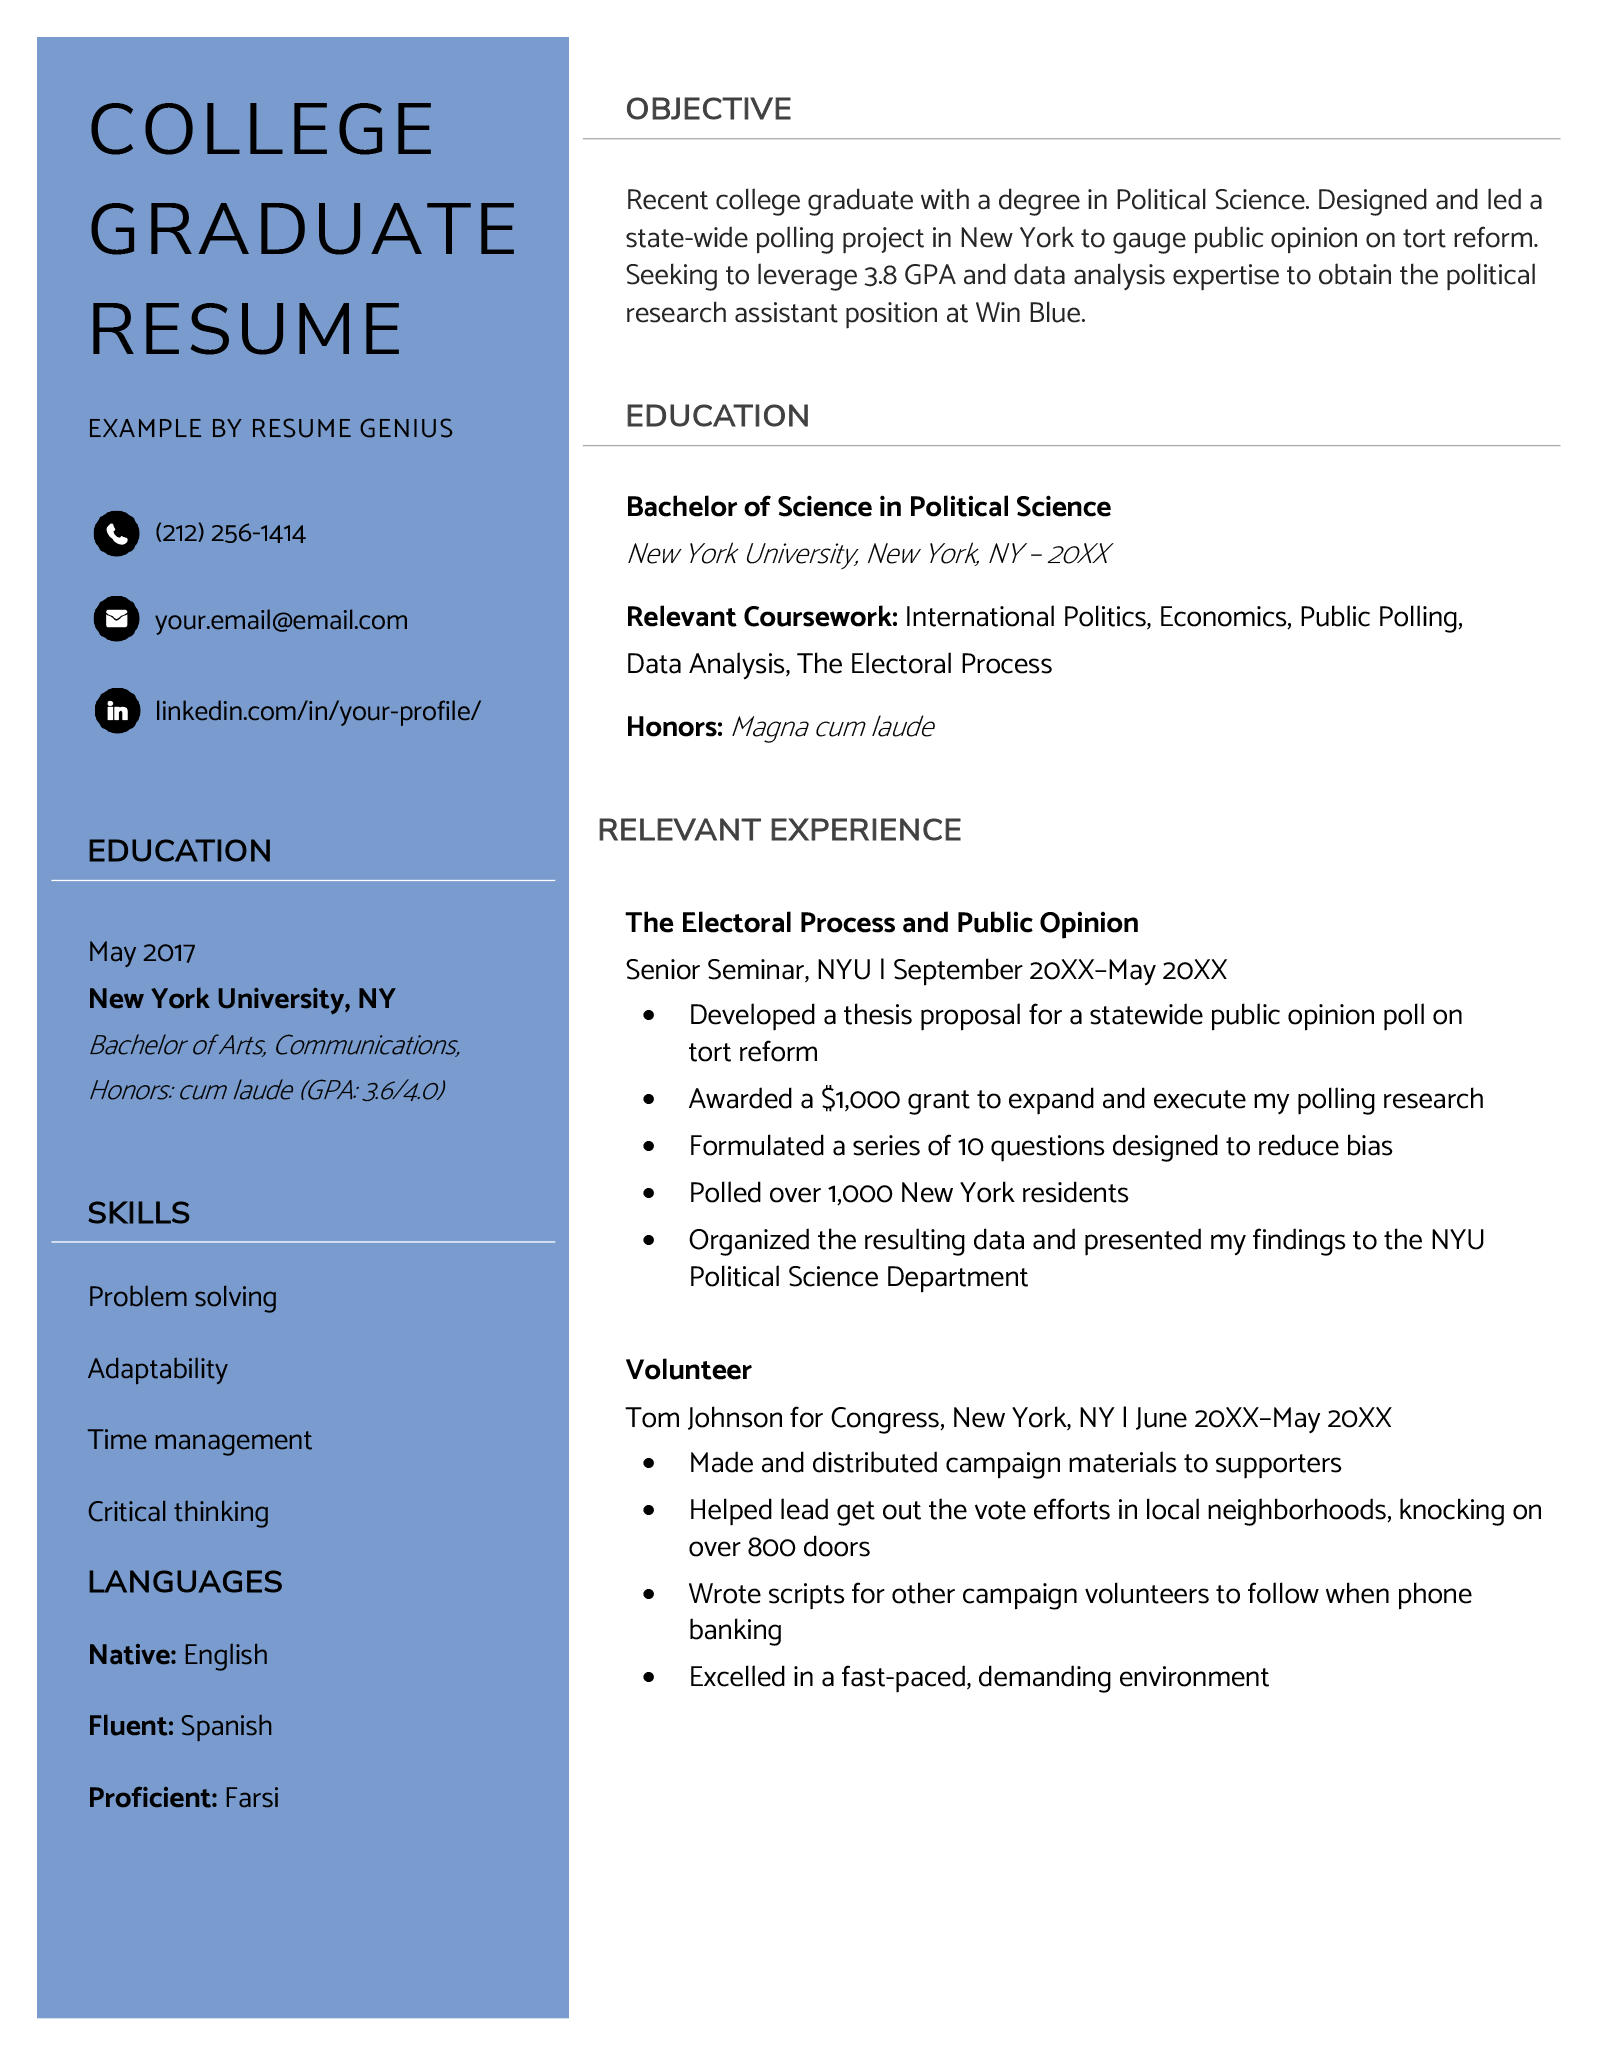 A college graduate resume sample with no experience.